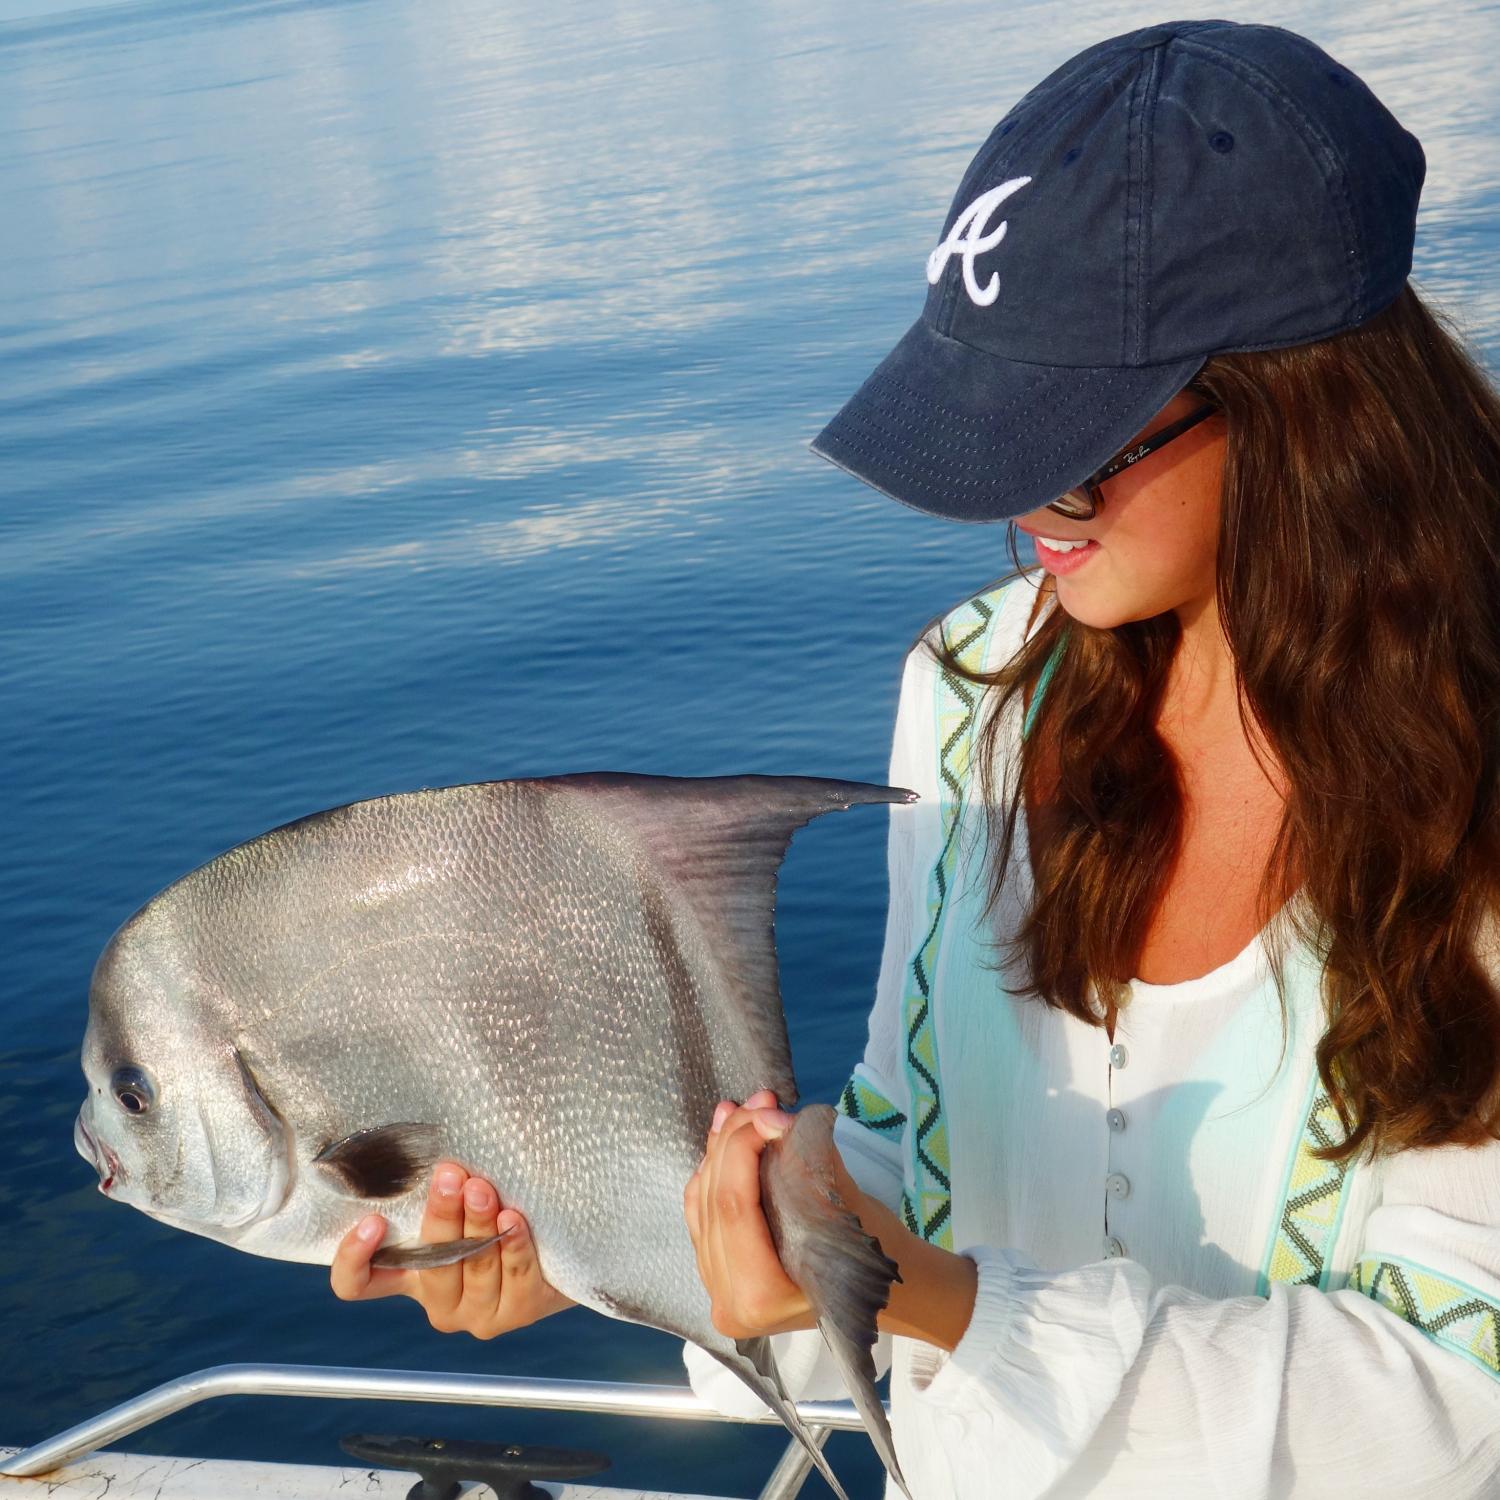 Ocean Fly Fishing Charter - Larger Fish Species of Charleston